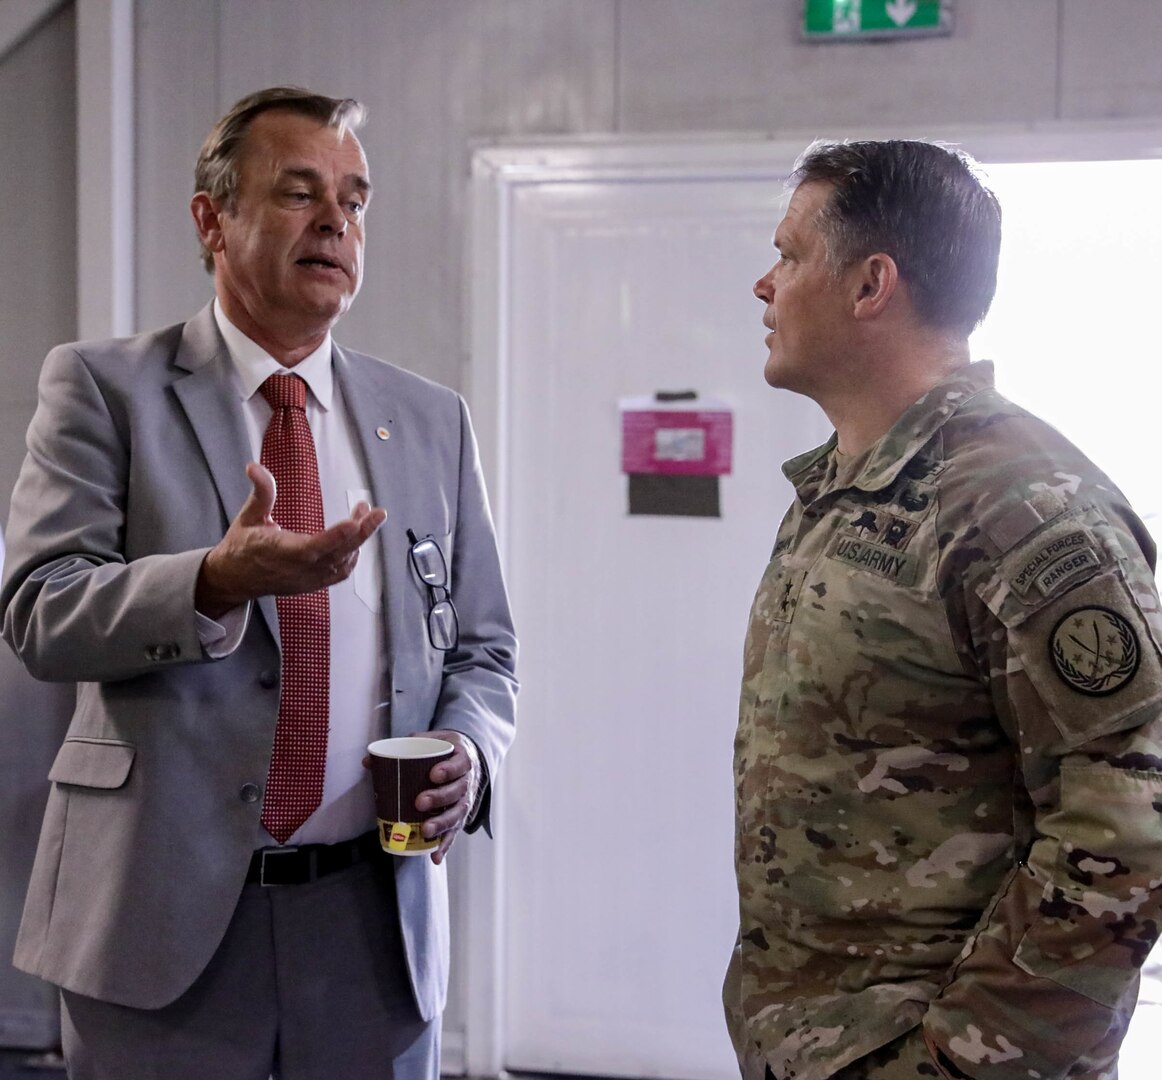 U.S. Army Maj. Gen. John Brennan, Combined Joint Task Force -Operation Inherent Resolve (CJTF-OIR) commander, right, and Michel Rentenaar, the Netherlands Ambassador to Iraq, hold a conversation at the Ambassadors Day event at Union III forward operating base in Baghdad, Iraq, April 21, 2022. During the CJTF-OIR-hosted event, representatives from more than 25 Coalition countries discussed the CJTF-OIR mission and broad efforts to tackle enduring regional security and stability challenges. (U.S Army photo by Spc. Nathan Smith)